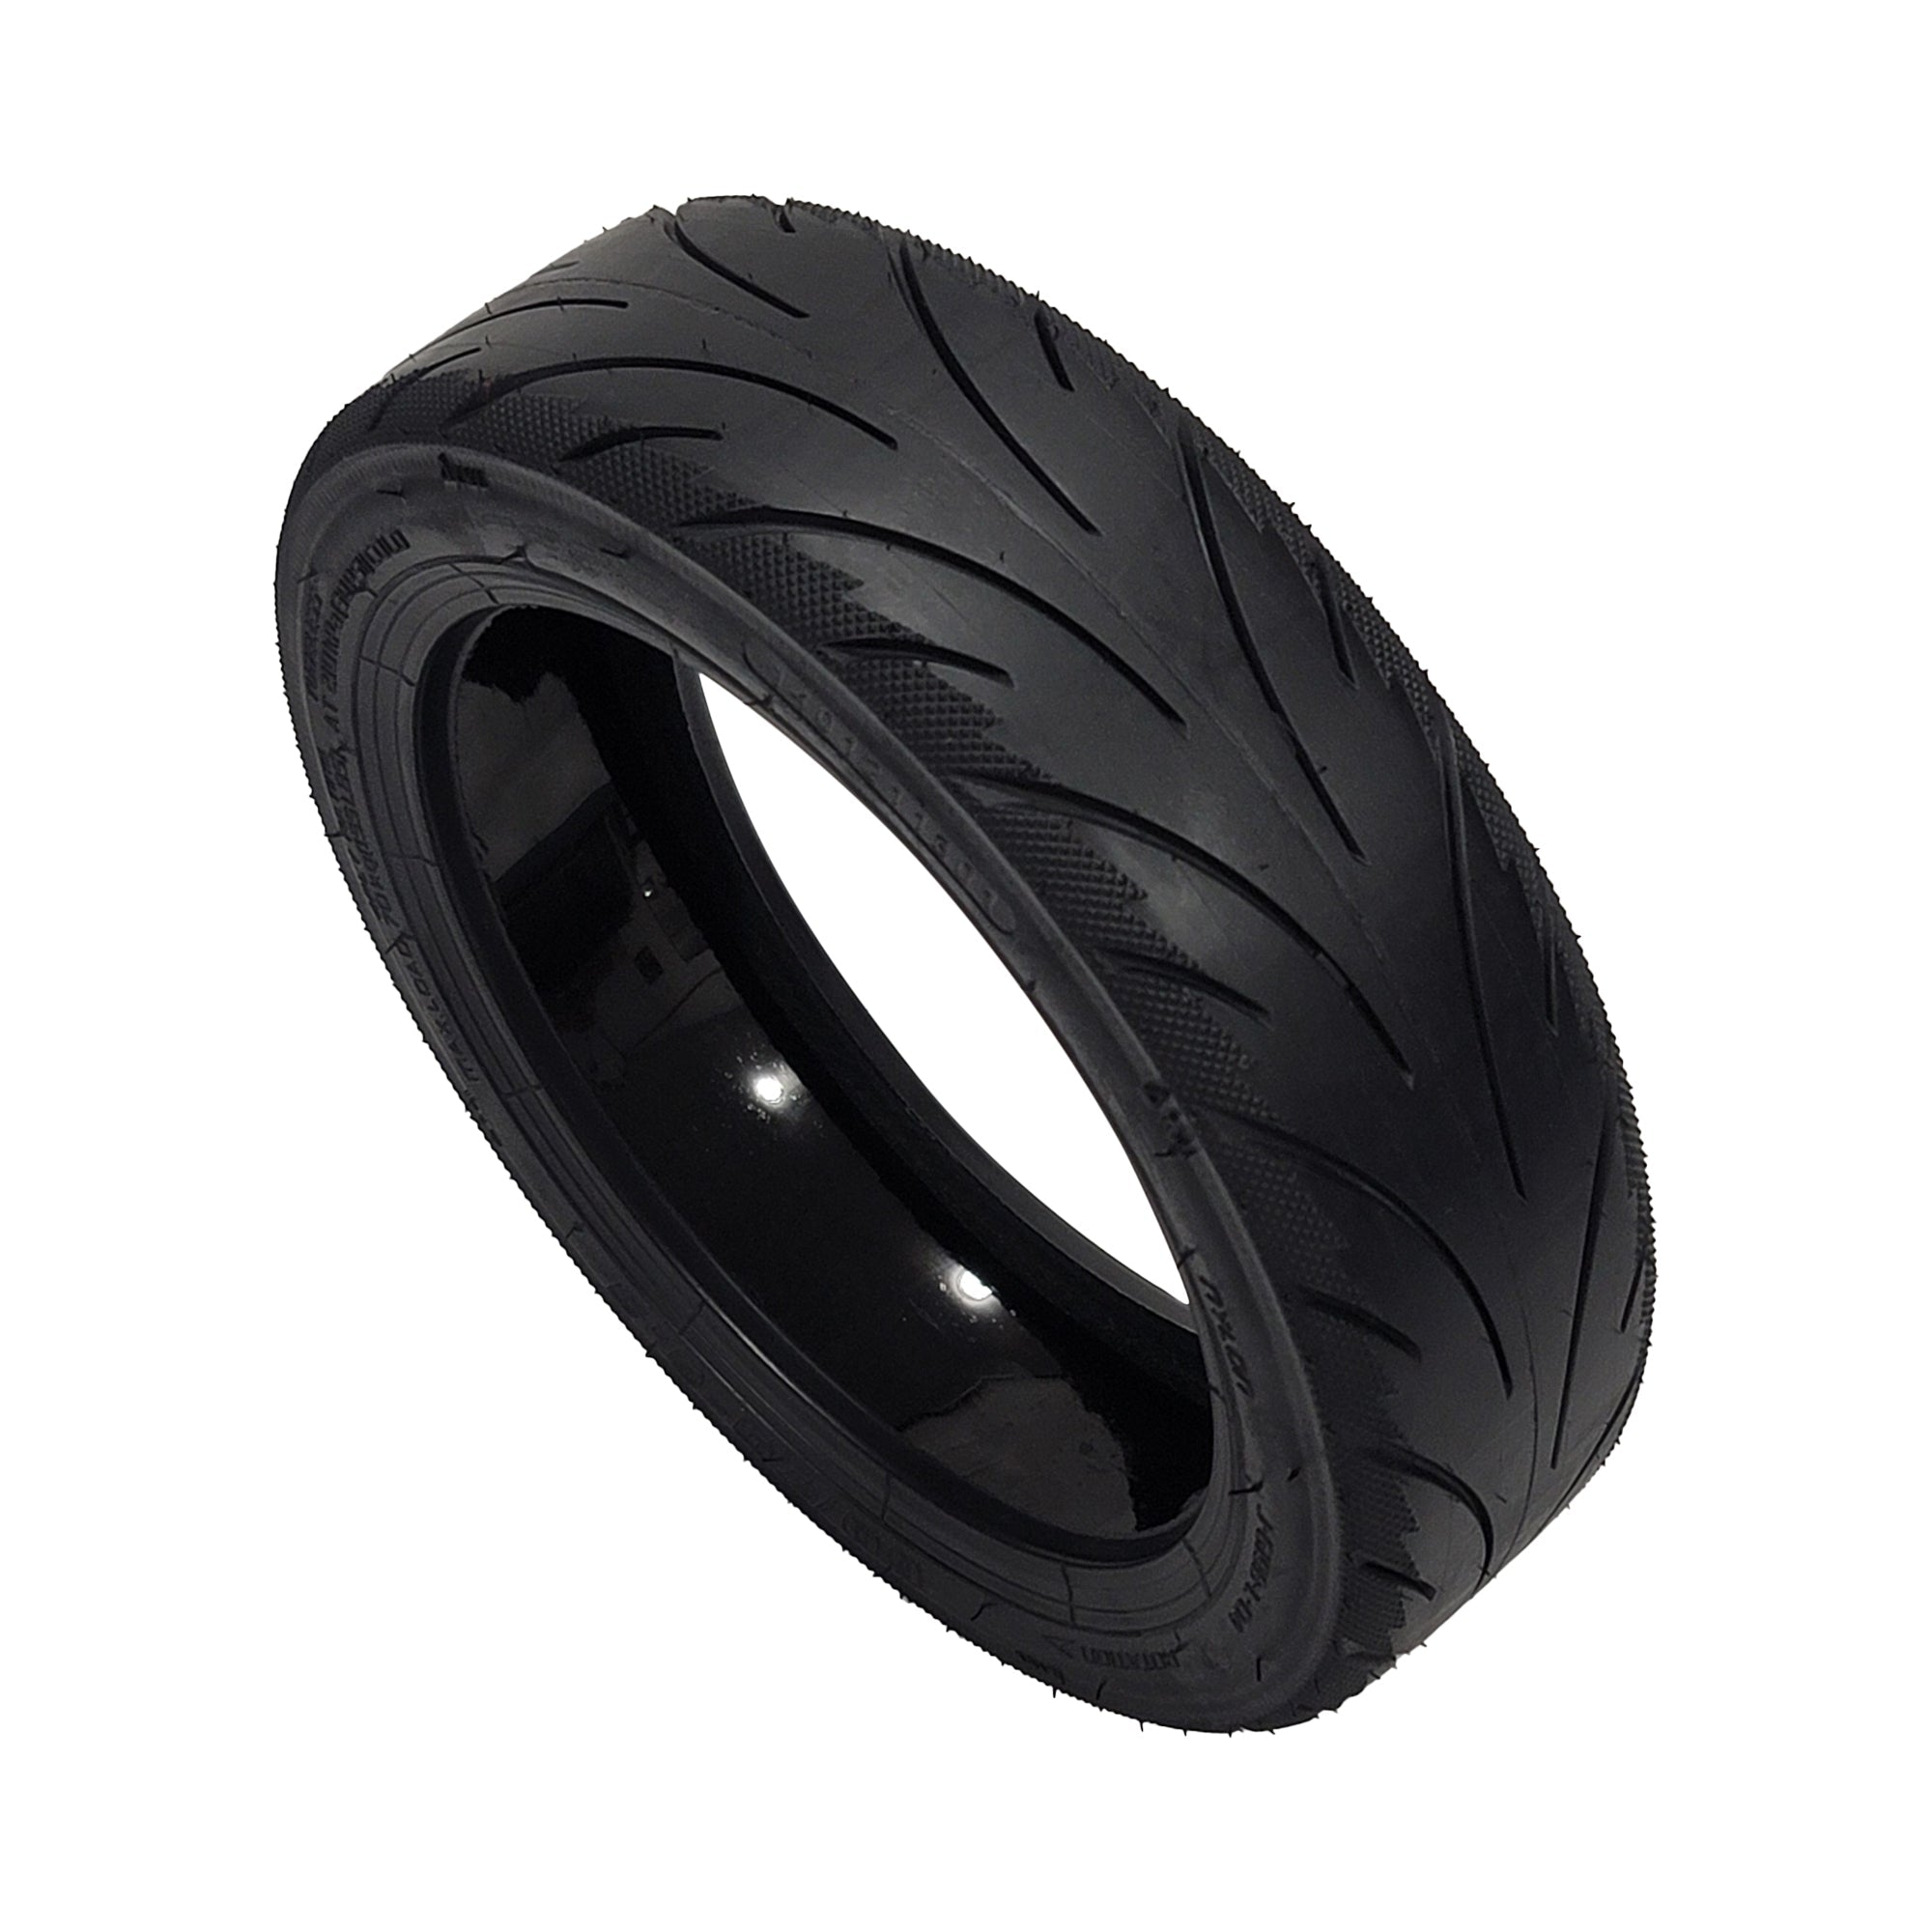 Spare Part - Flat-Prevention Inner Membrane Replacement Tire For Ninebot Max G30/G30L Kick Scooter